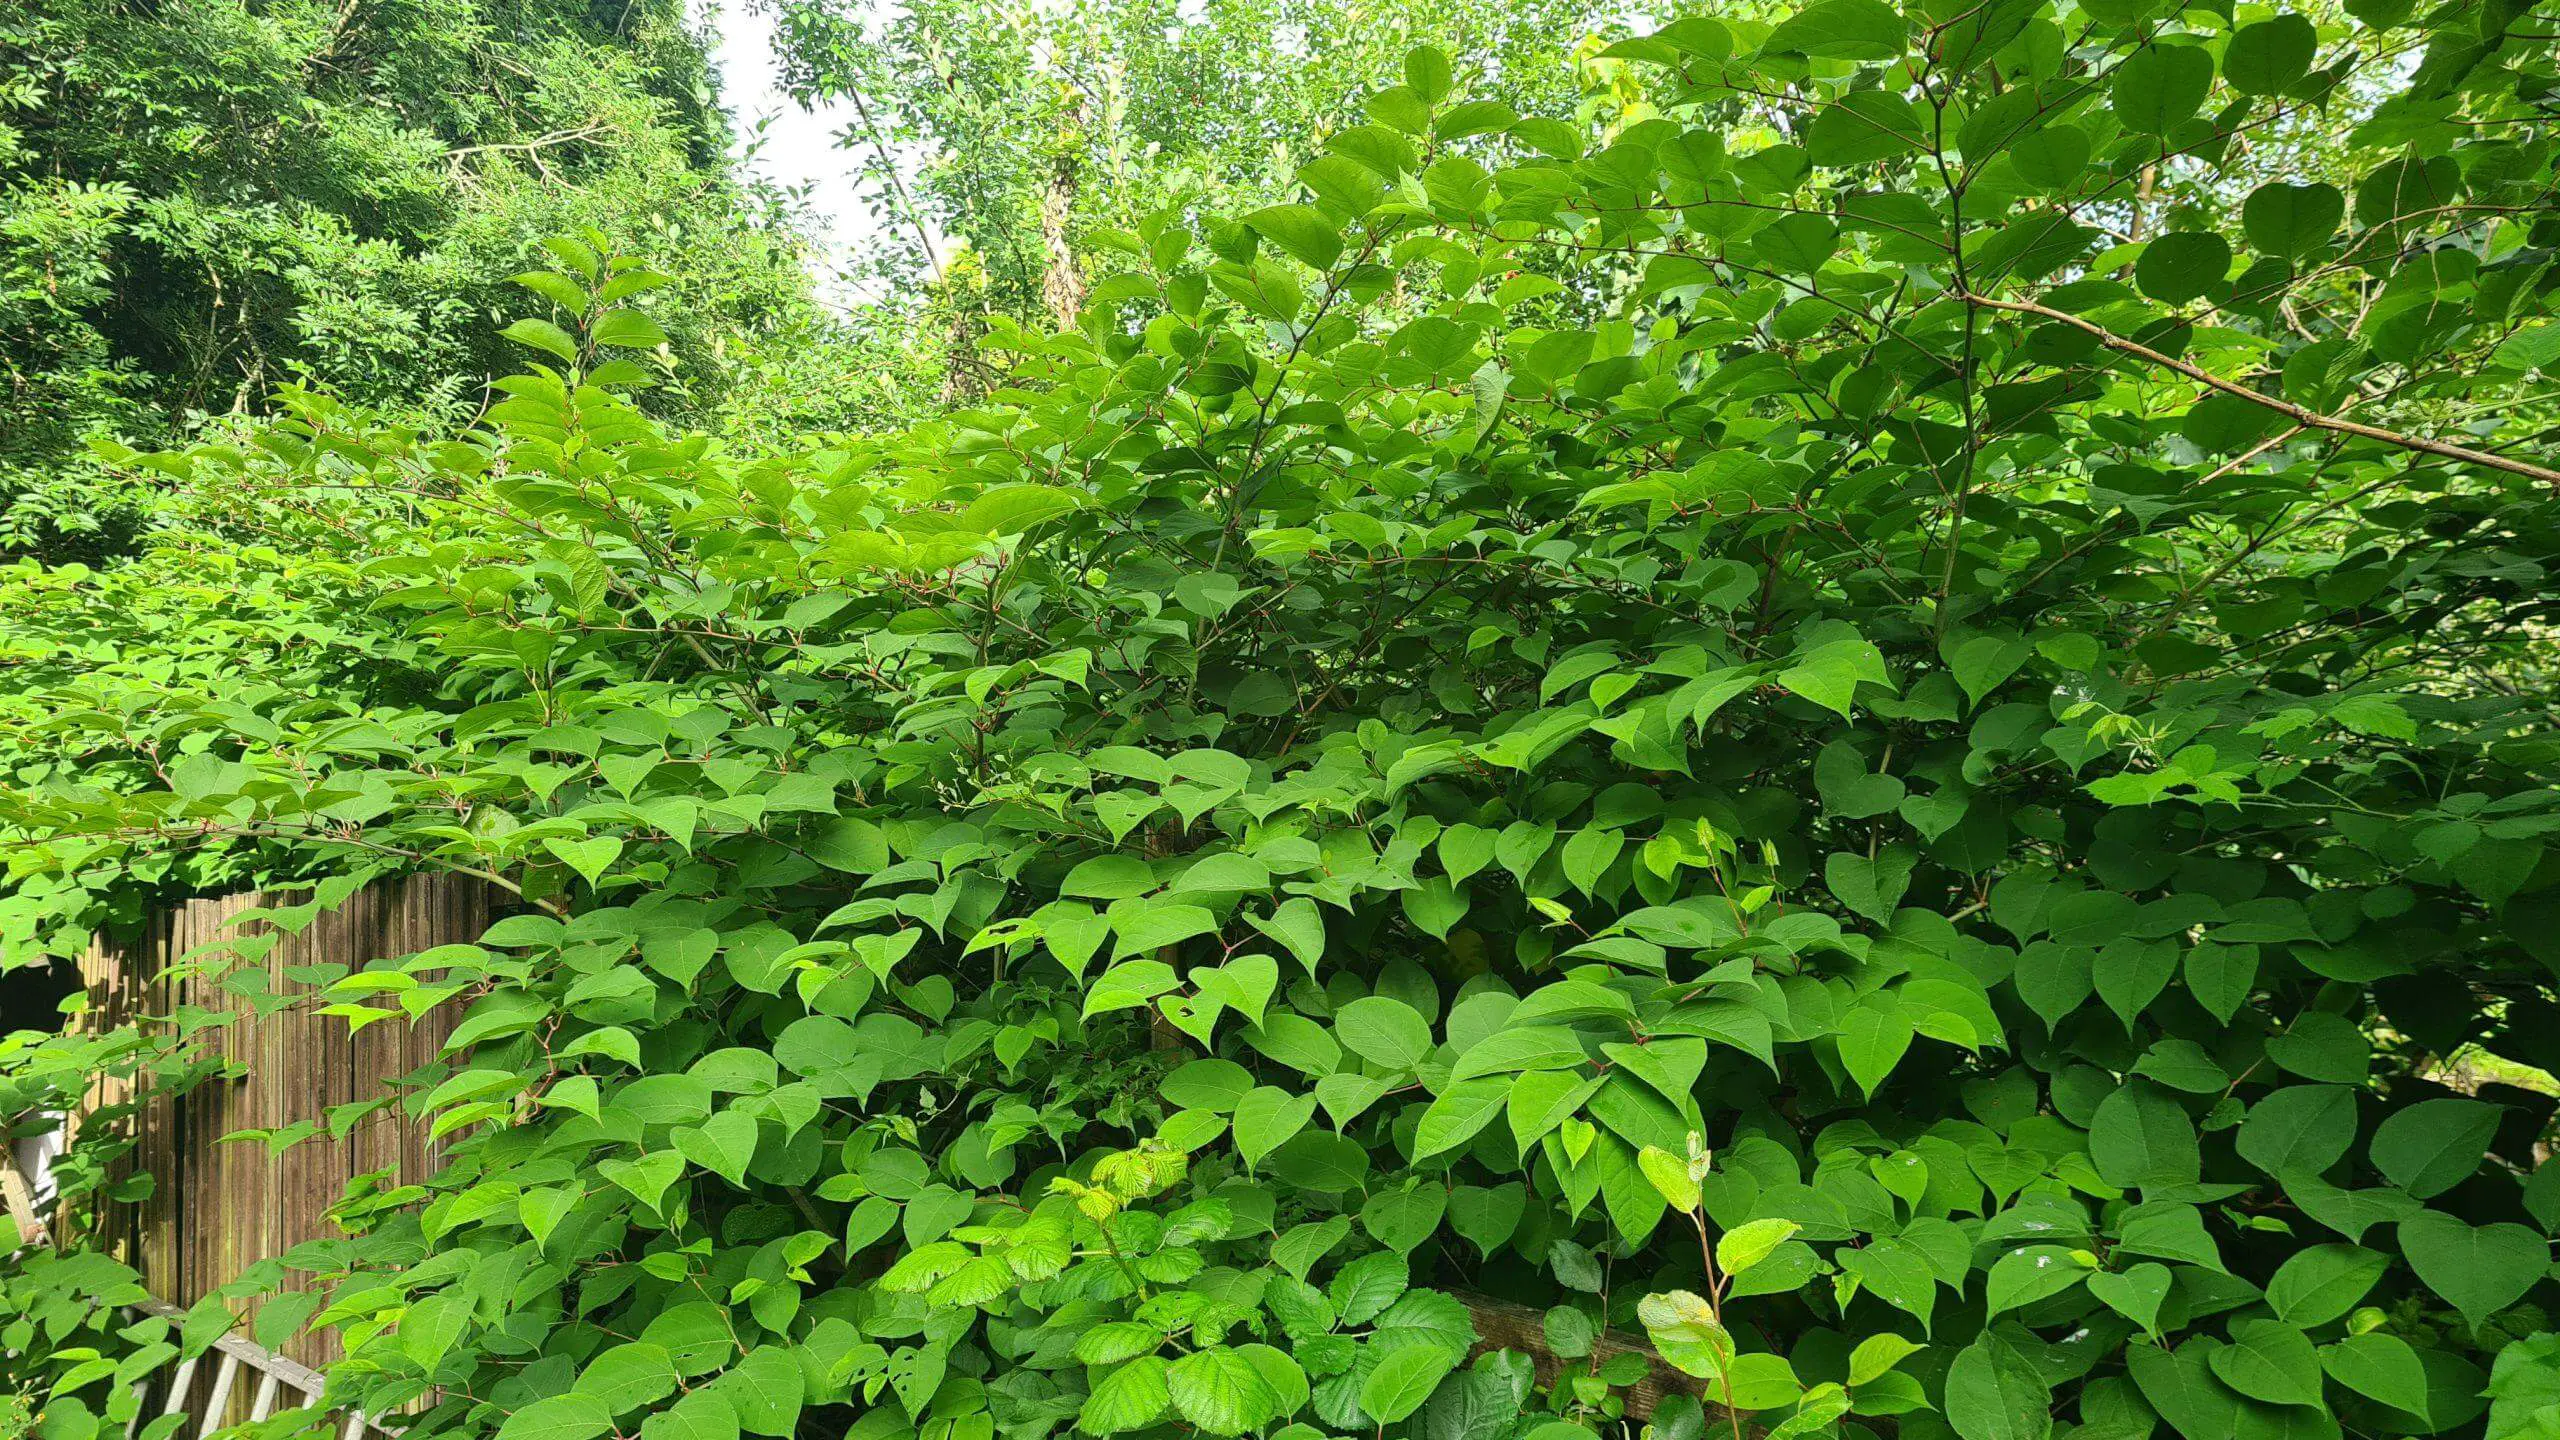 Japanese knotweed at the height of summer dominating an area of a garden